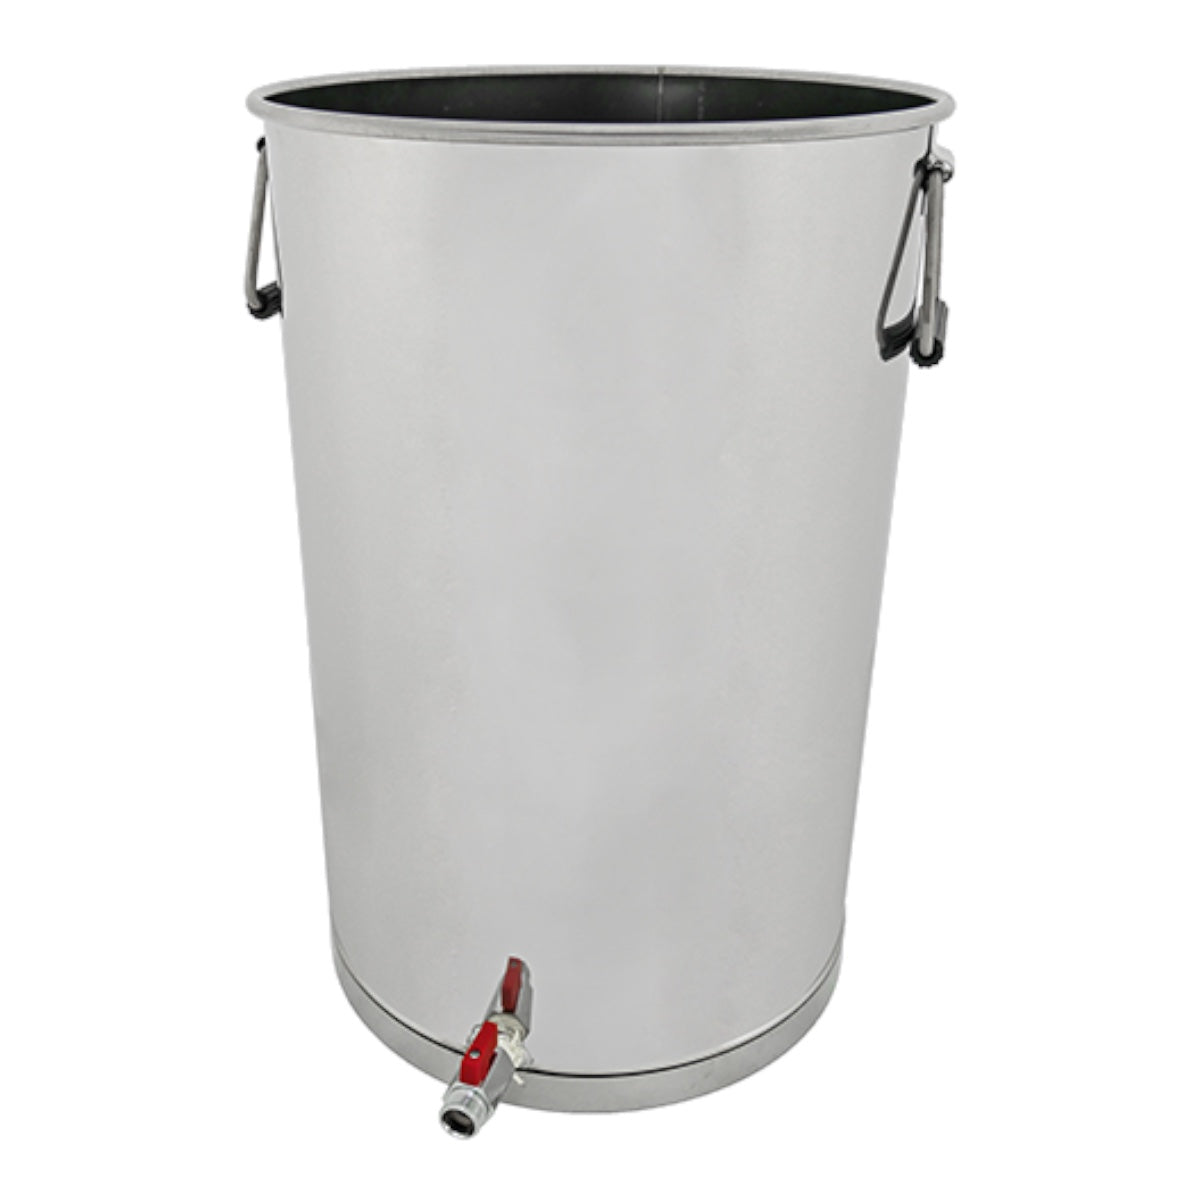 Sedimentation tank with insert | 30 liters for PROLAQ WS cleaning system